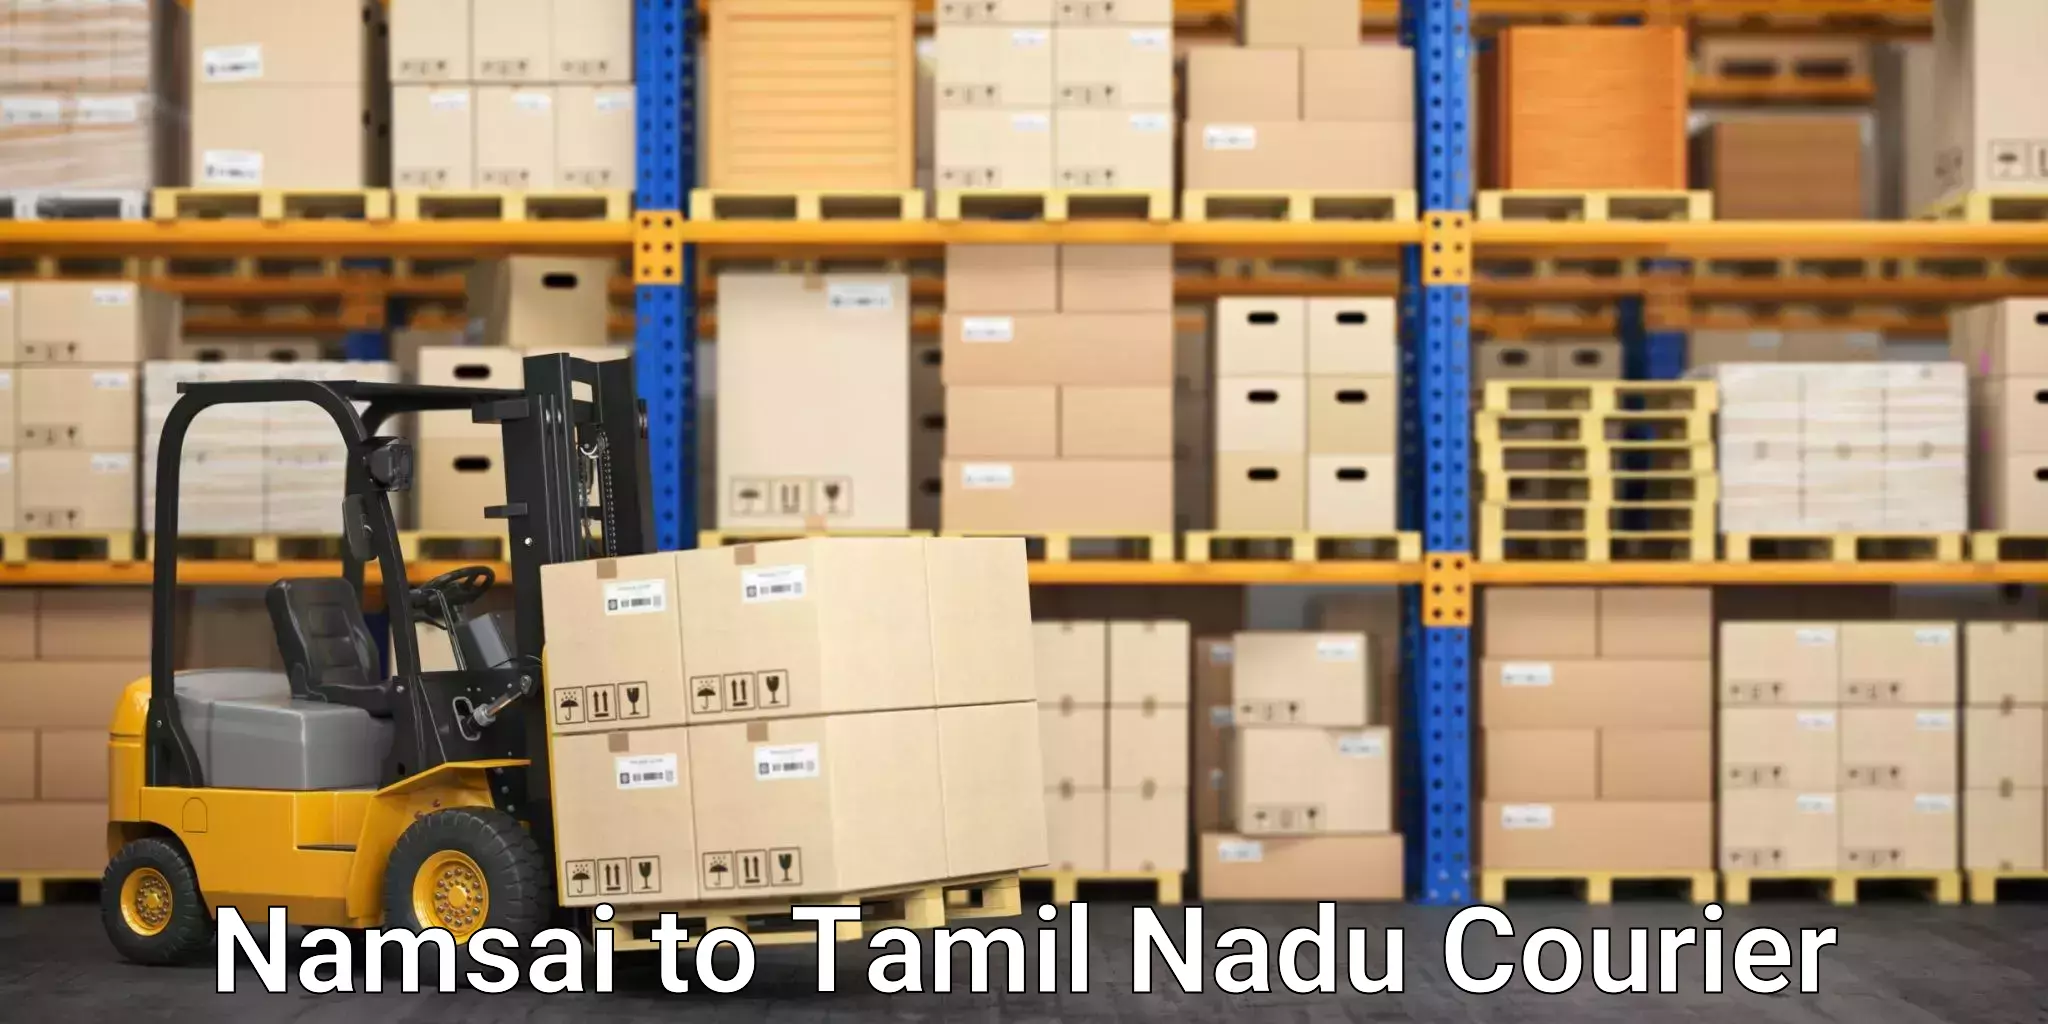 Same-day delivery solutions Namsai to Tamil Nadu